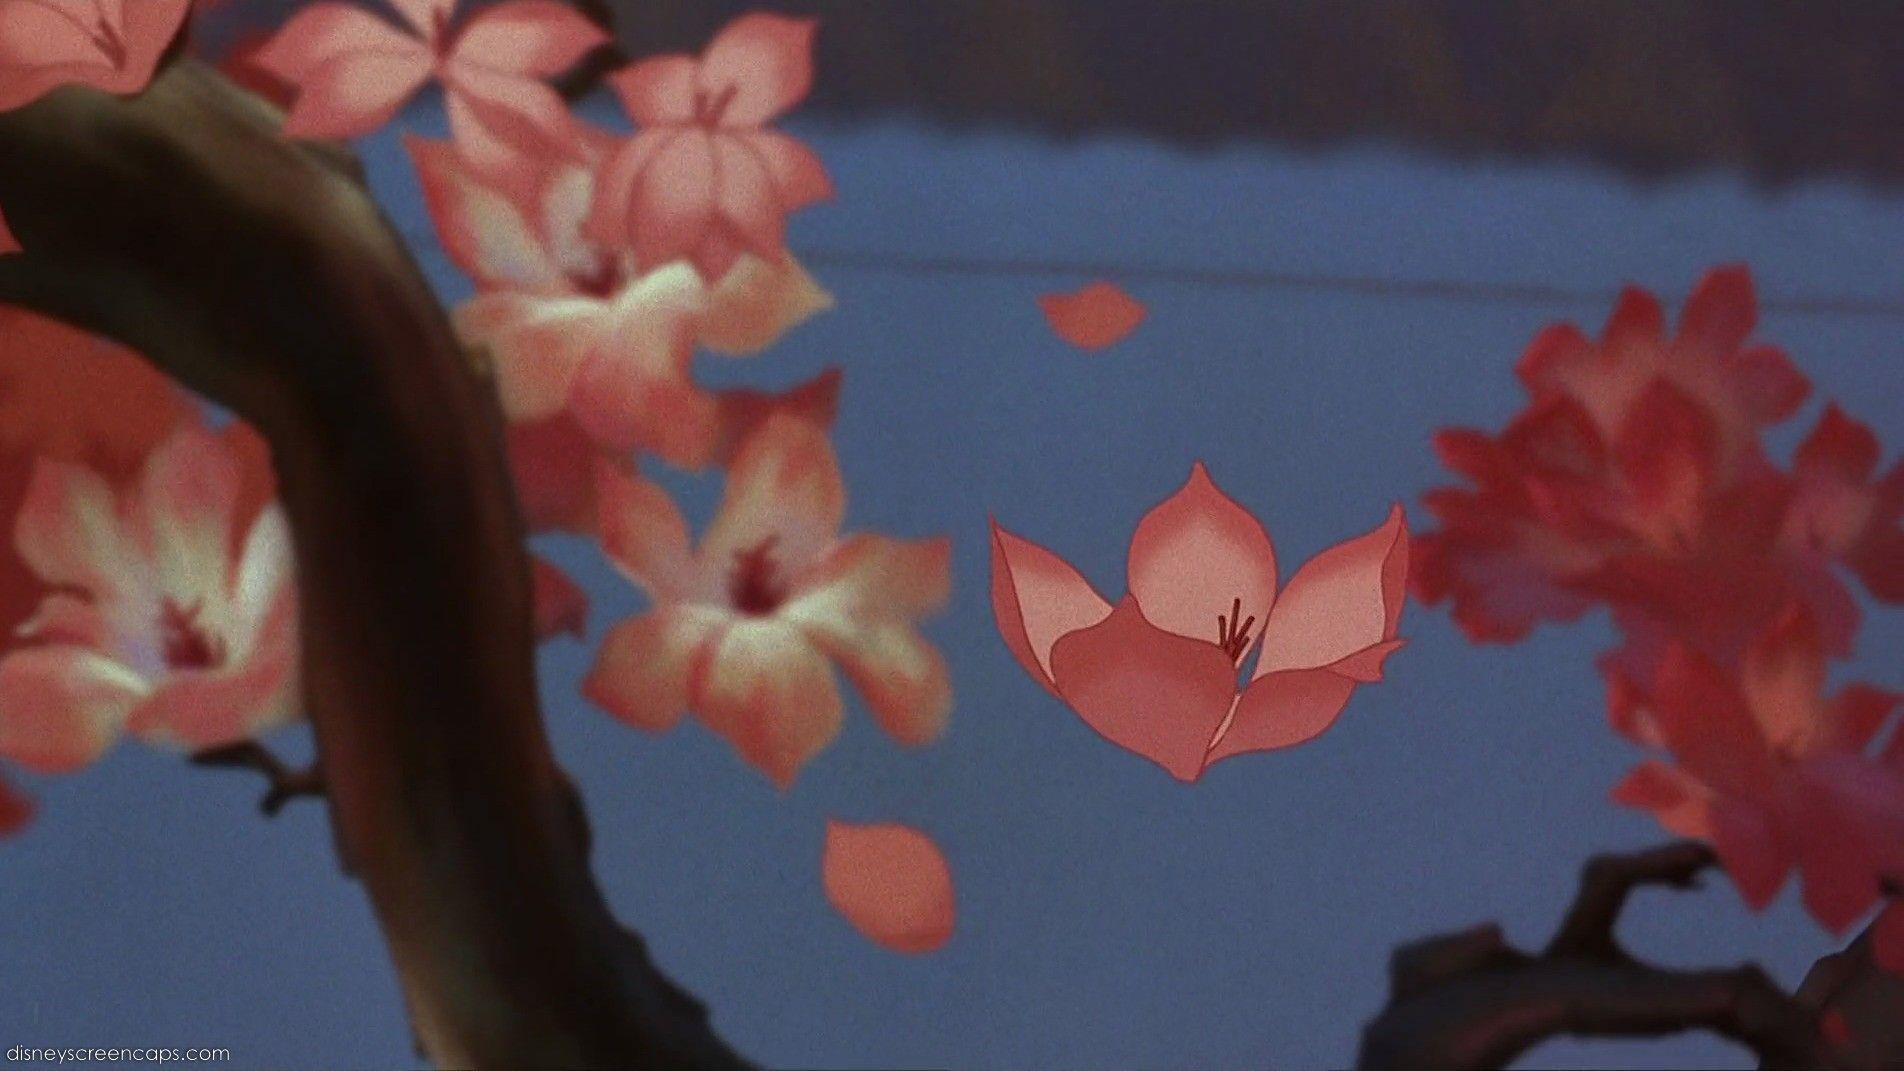 Empty Backdrop from Mulan crossover Image